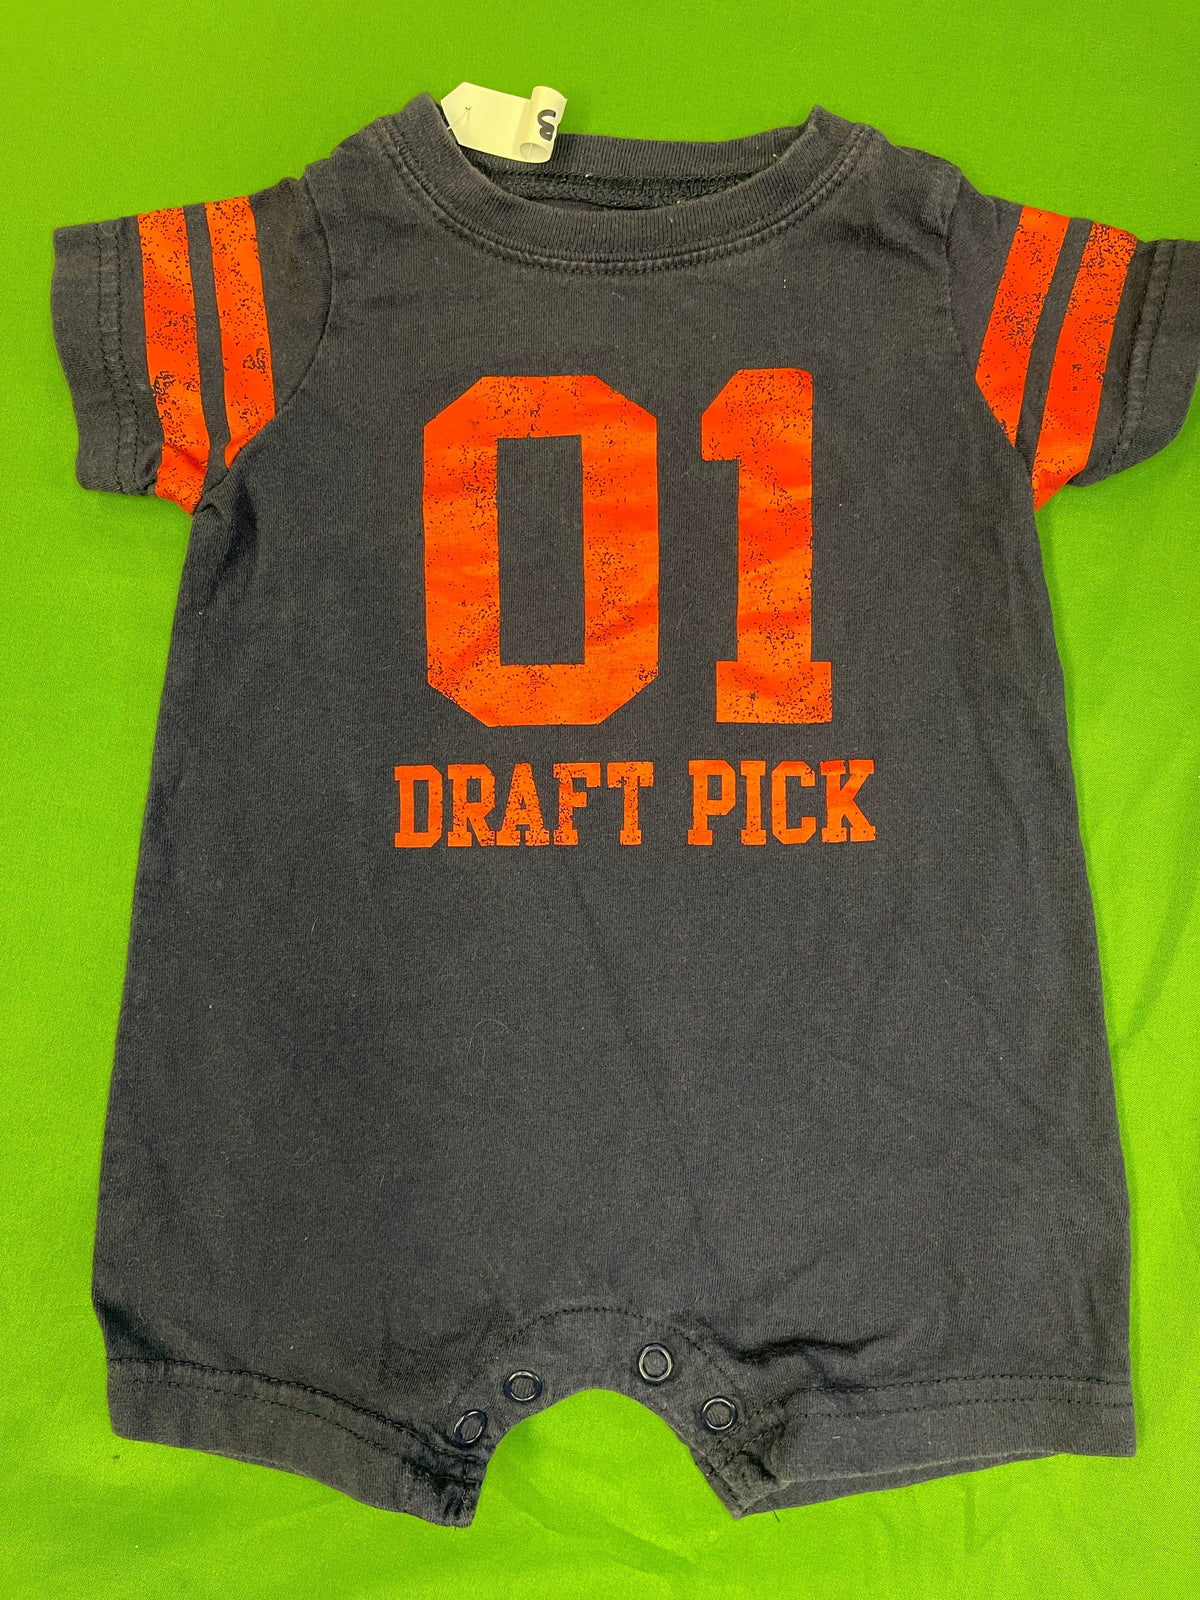 American Football Carter's "Draft Pick" Playsuit/Romper Infant Baby 3 Months